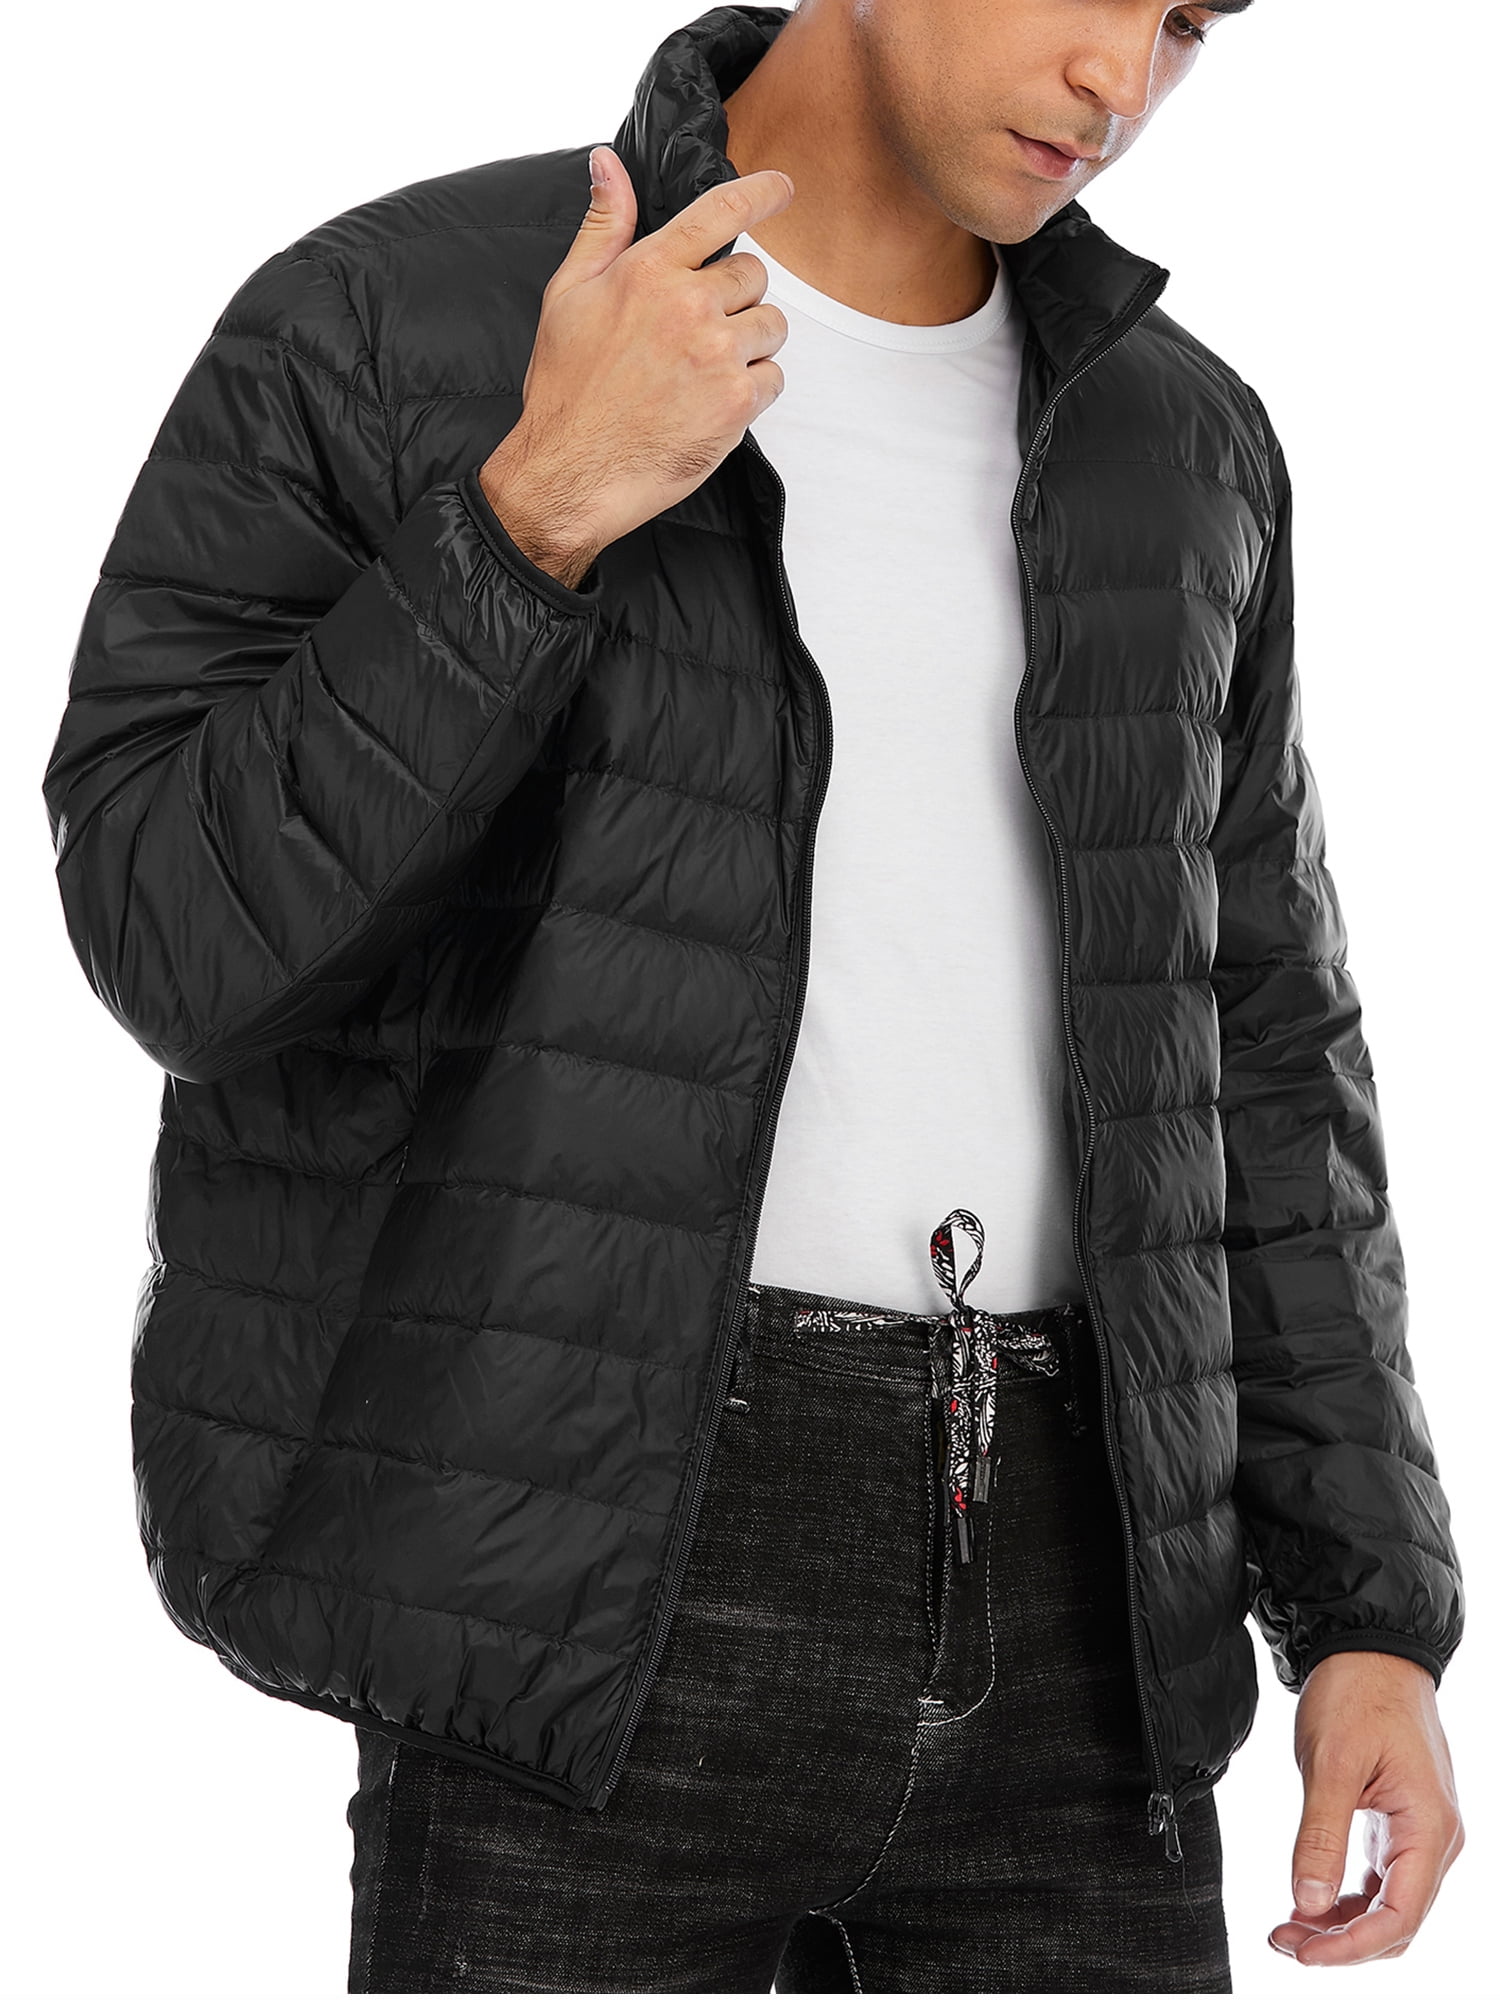 SELX Men Claasic Zip-Up Stand Collar Padded Jacket Winter Down Coat